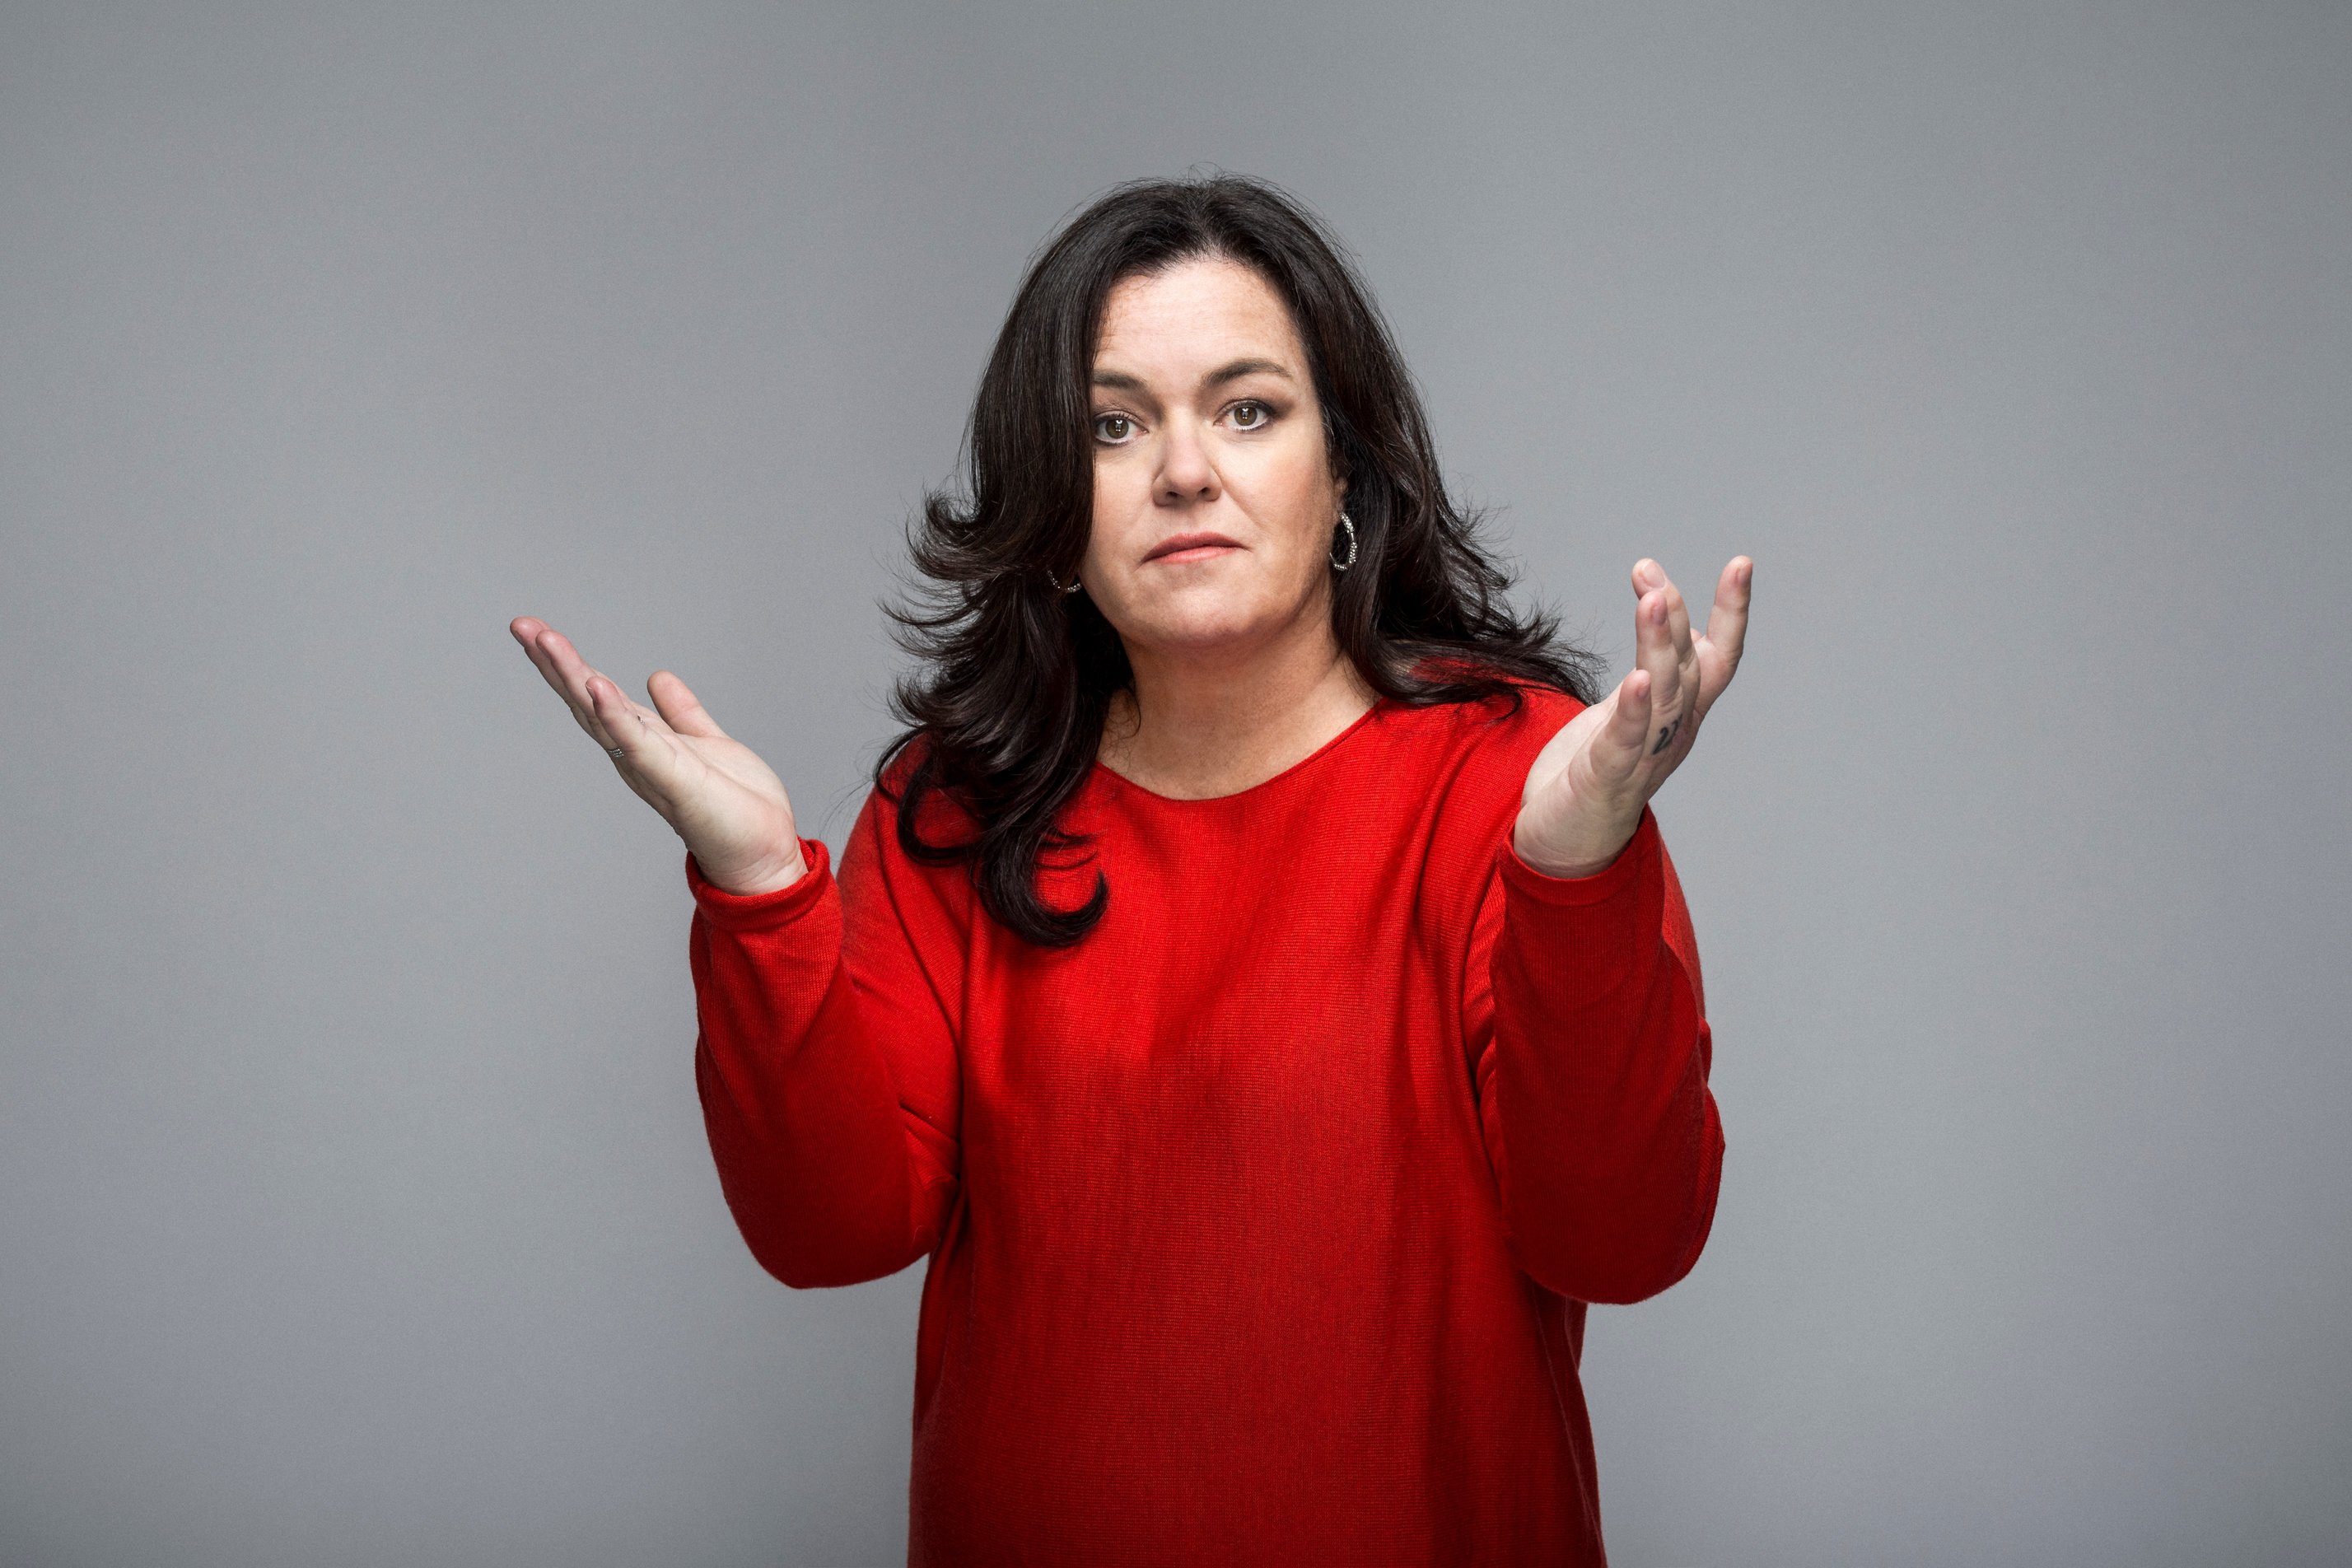 1/24/14 – Rosie O’Donnell